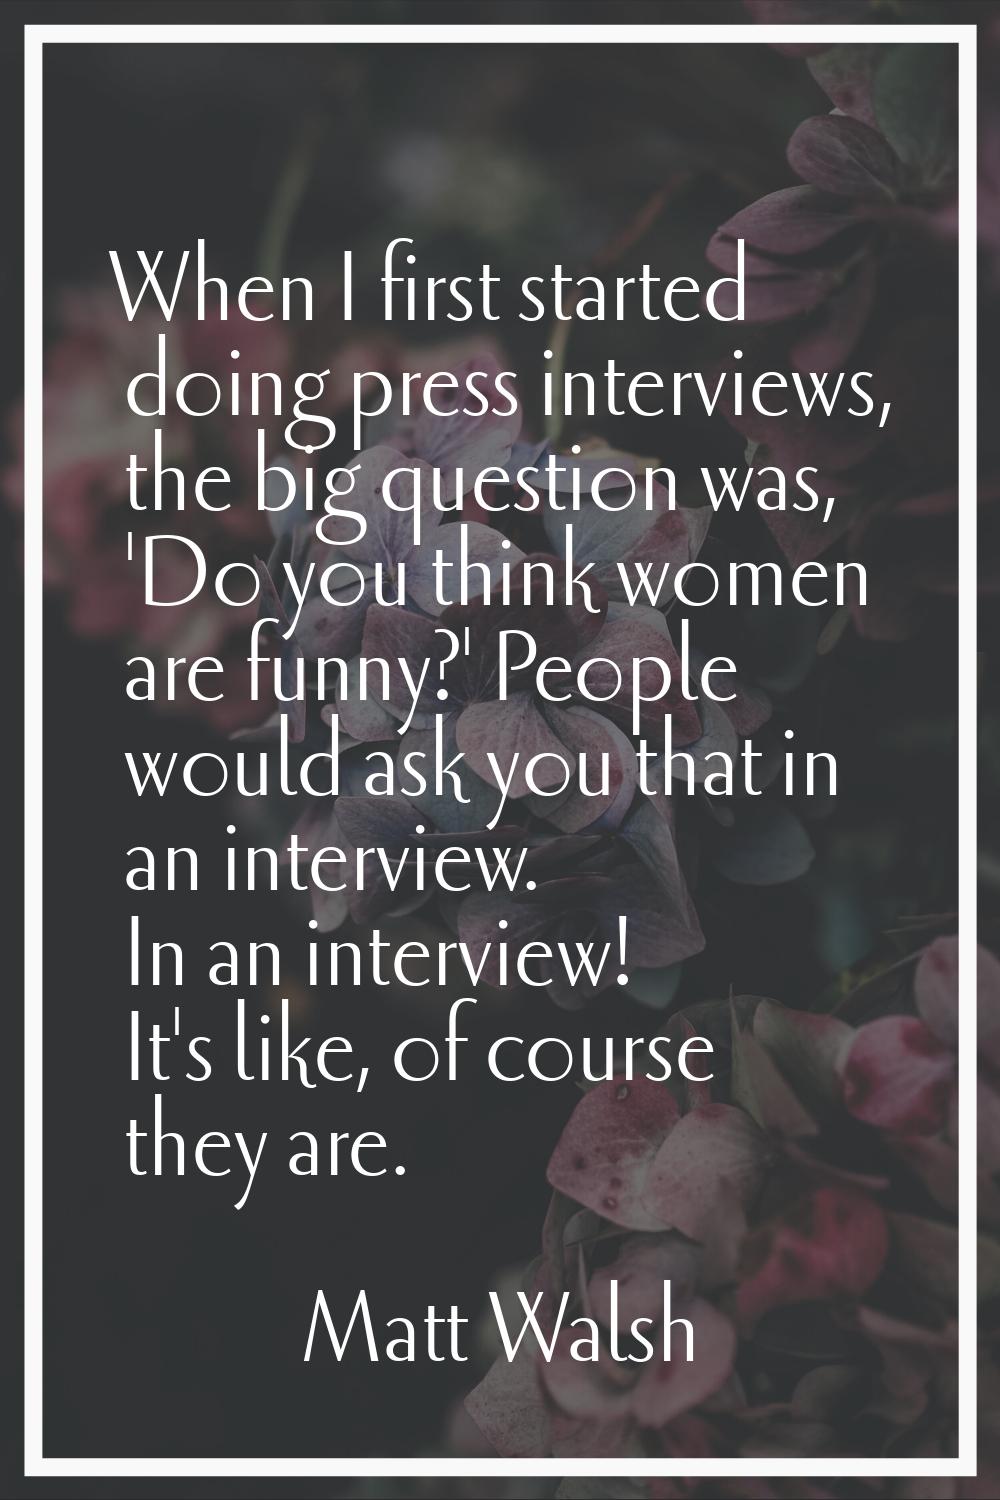 When I first started doing press interviews, the big question was, 'Do you think women are funny?' 